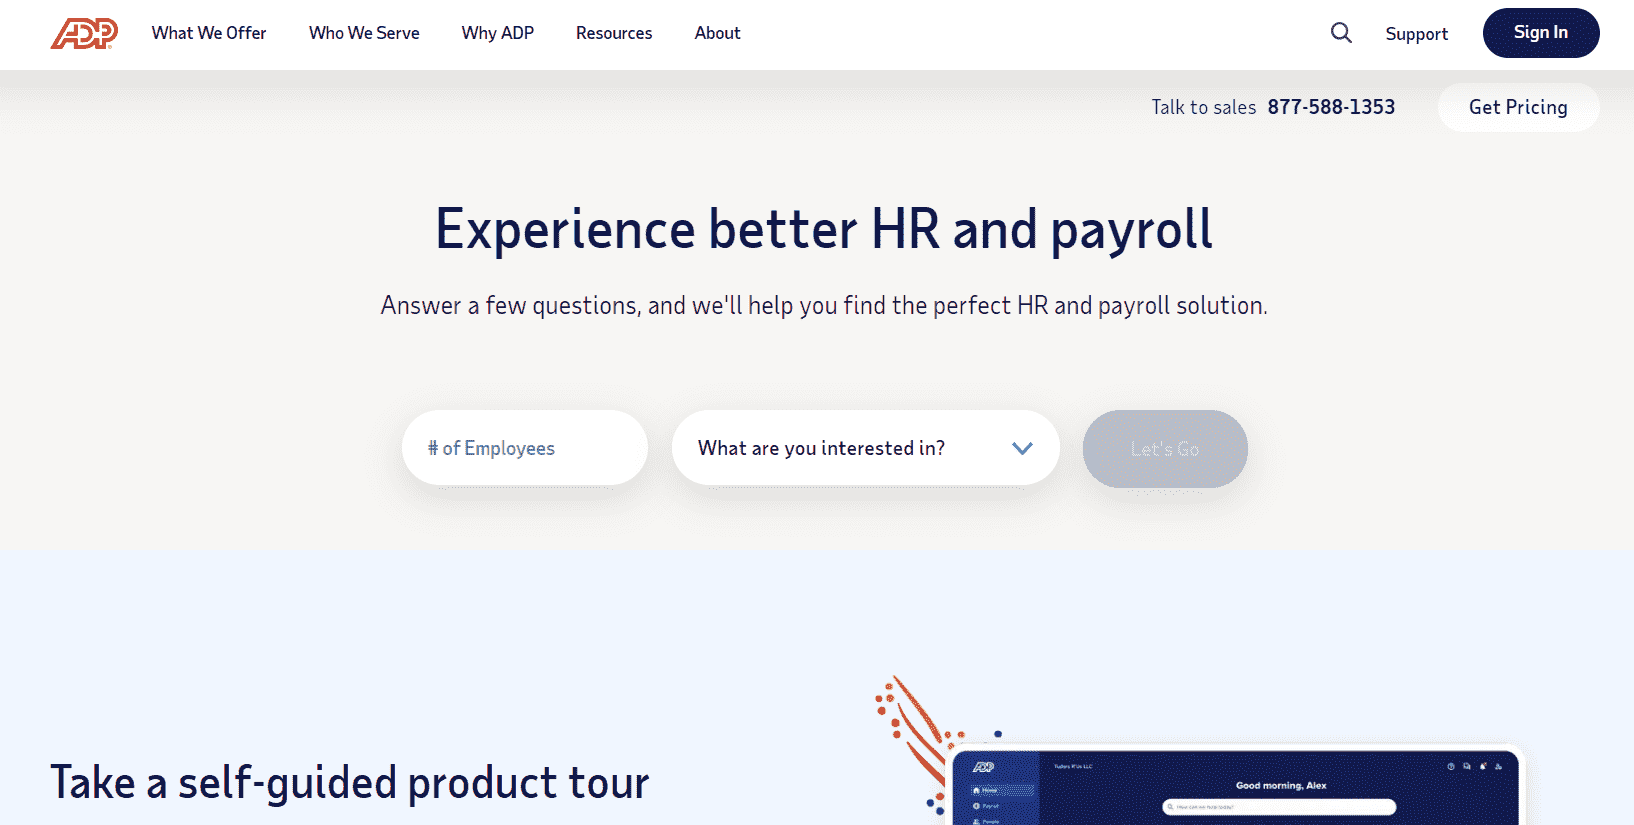 ADP's website promising better HR management product with other BPO services.